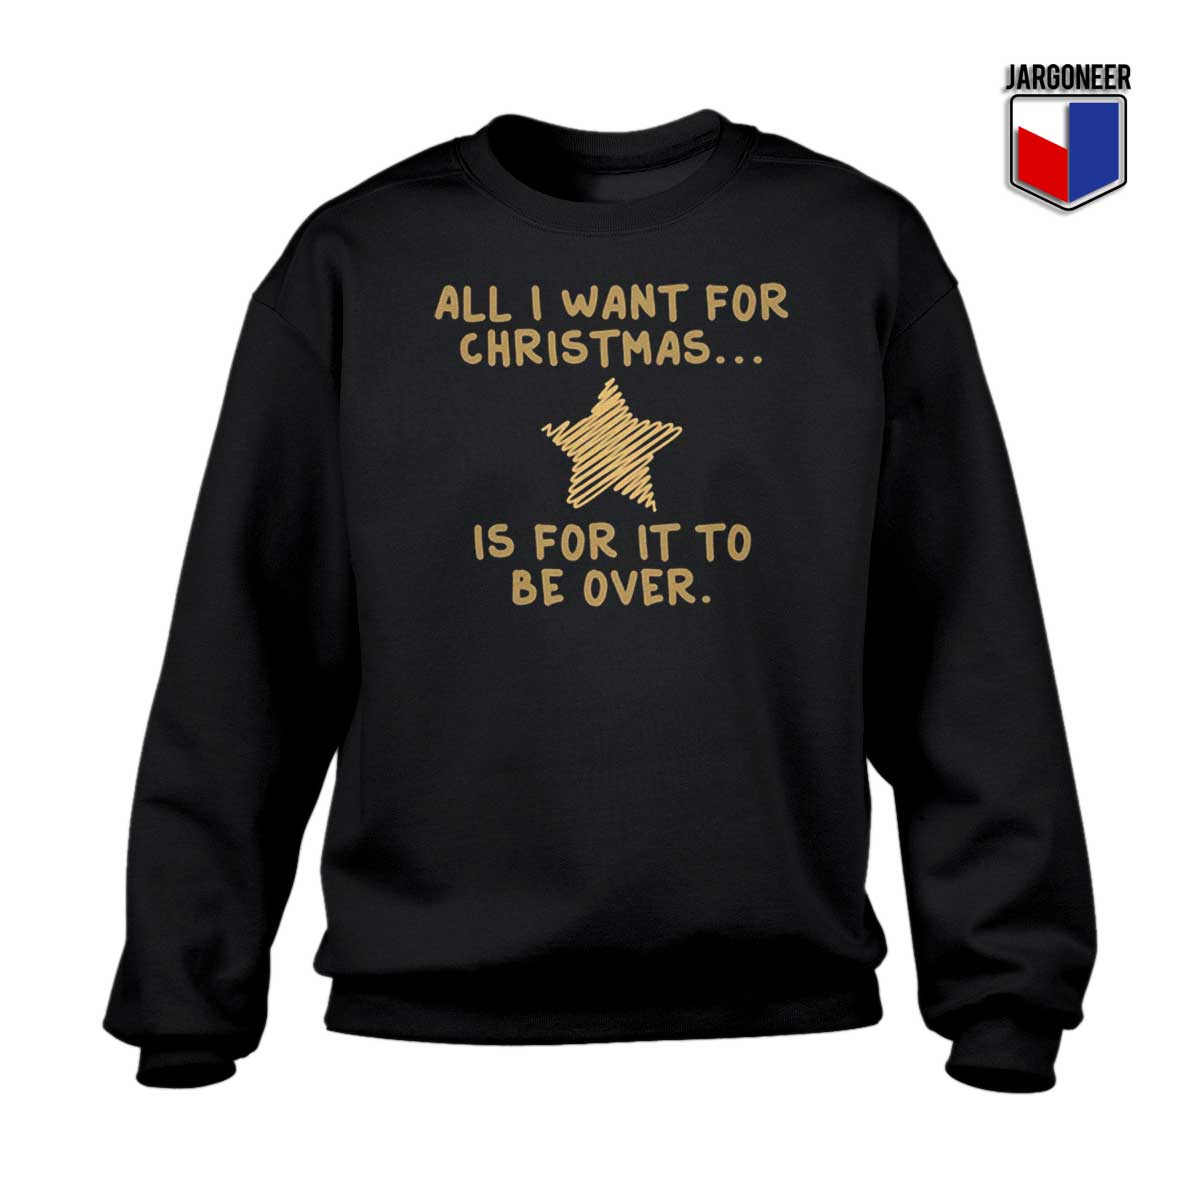 All I Want For Christmas Sweatshirt - Shop Unique Graphic Cool Shirt Designs